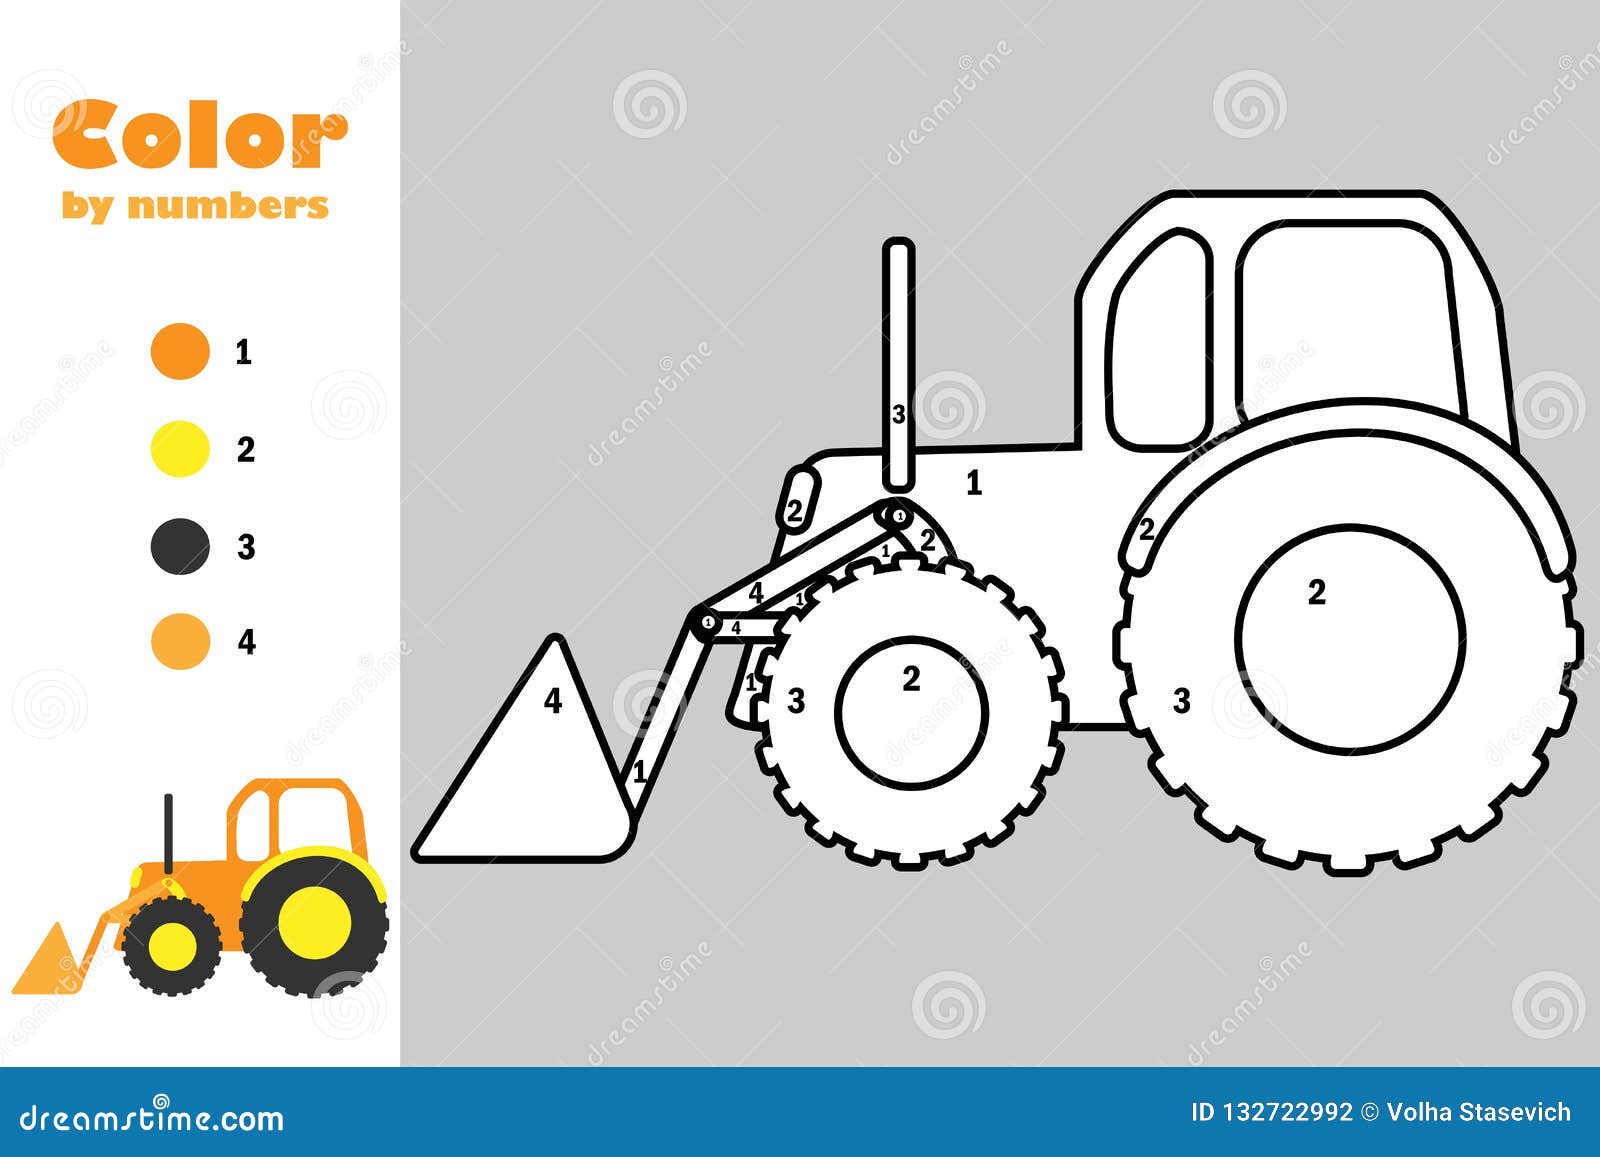 Bulldozer In Cartoon Style, Color By Number, Education Paper Game